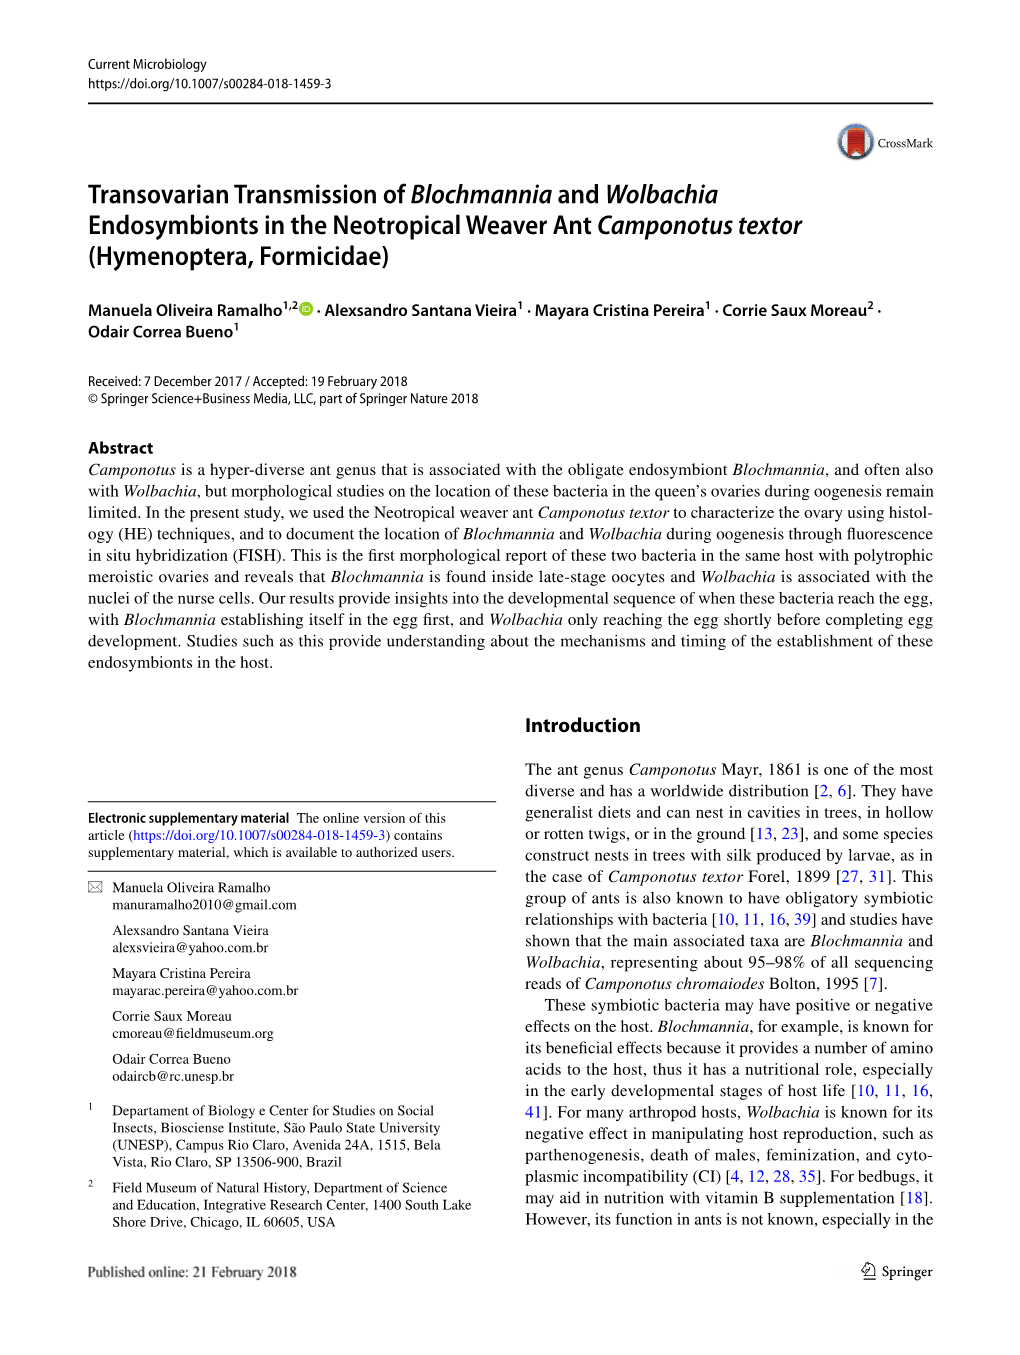 Transovarian Transmission of Blochmannia and Wolbachia Endosymbionts in the Neotropical Weaver Ant Camponotus Textor (Hymenoptera, Formicidae)